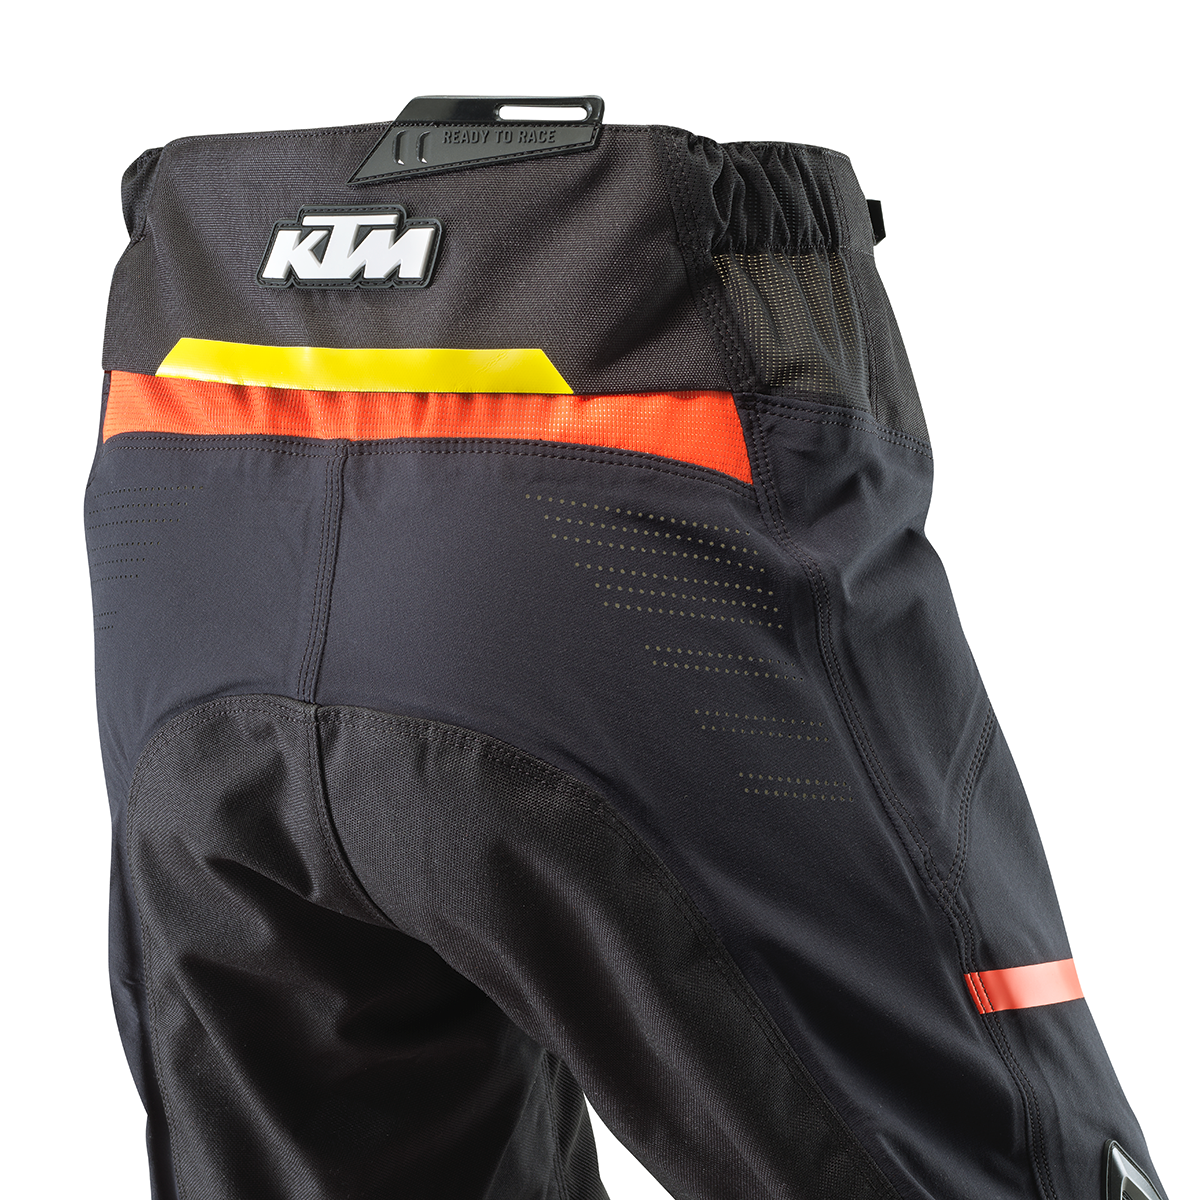 Motocross HYDROTEQ Off Road Pants Windproof Motorcycle Enduro Riding  Trousers Racing KTM Pants With Pads From Motohome88, $62.32 | DHgate.Com